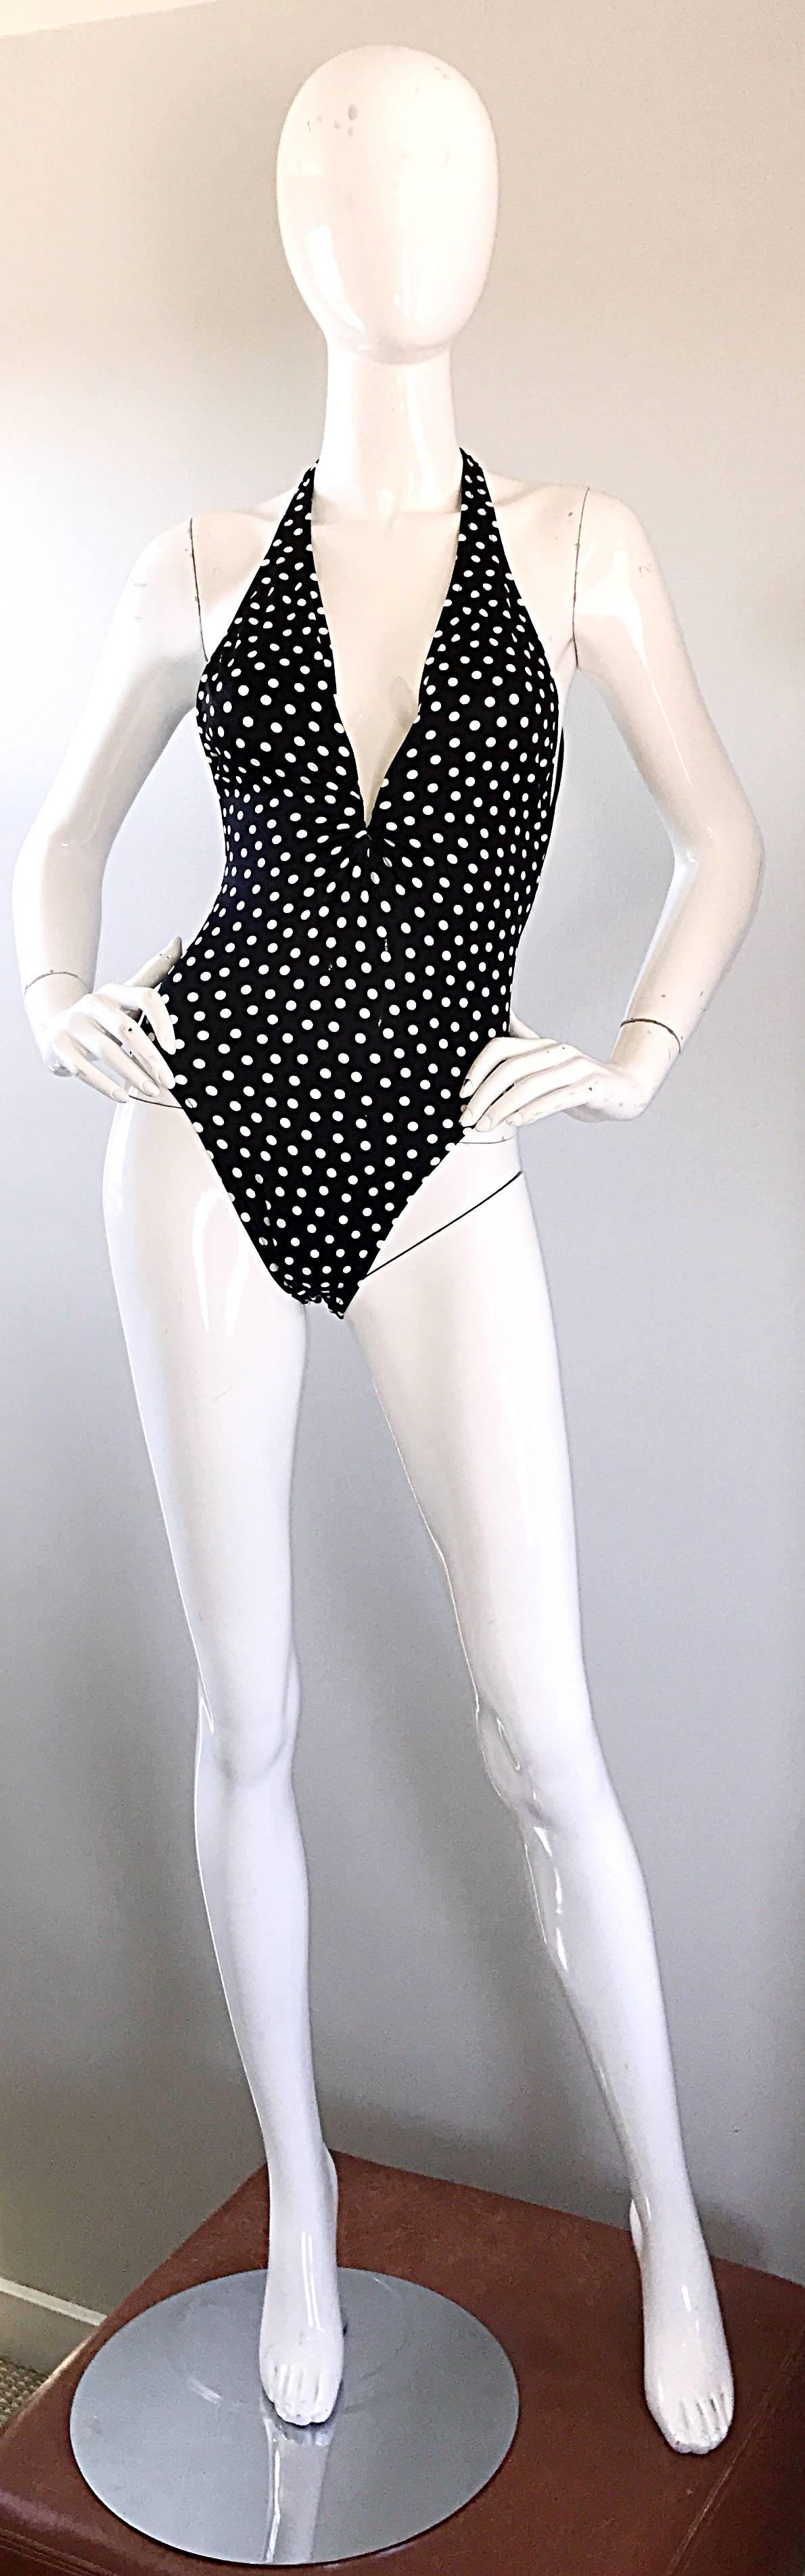 Sexy vintage BILL BLASS black and white polka dot one piece swimsuit or bodysuit! Features a black background with white polka dots throughout. Sexy plunging neckline reveals just the right amount of bust--not trashy at all! Origami detail at back.